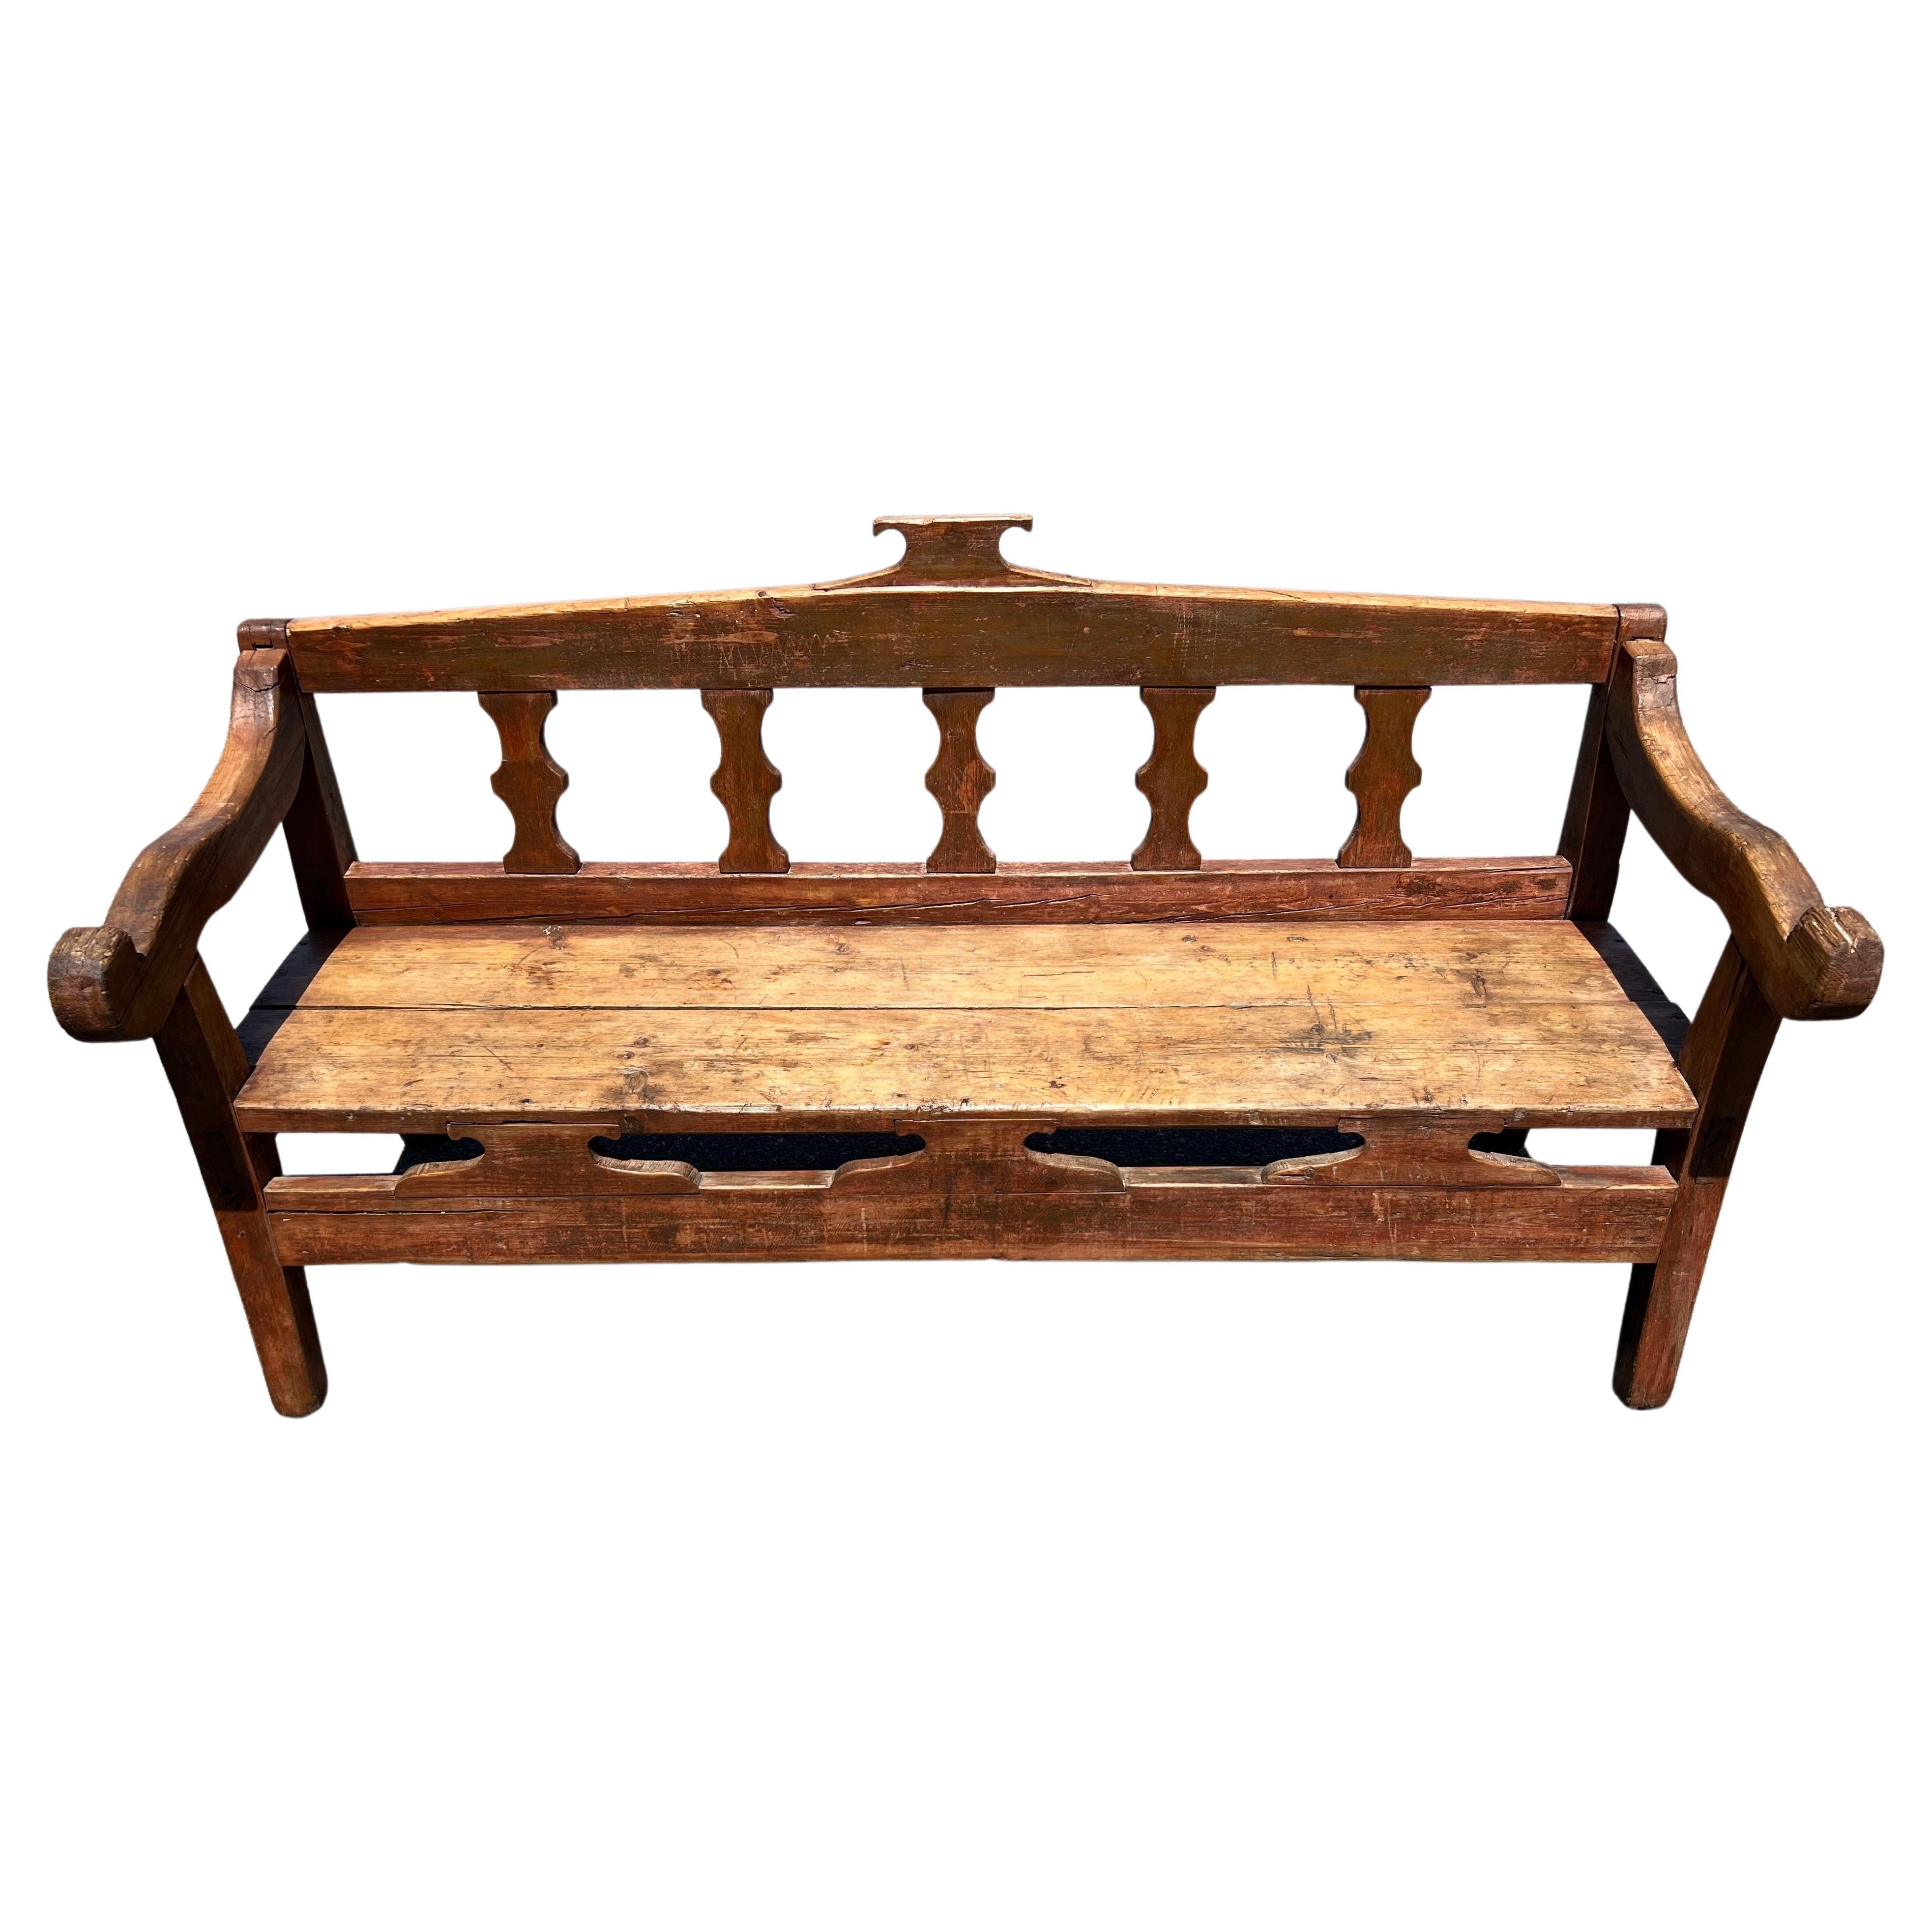 19th Century Decoratively Carved Bench in Original Pink and Red Paint For Sale